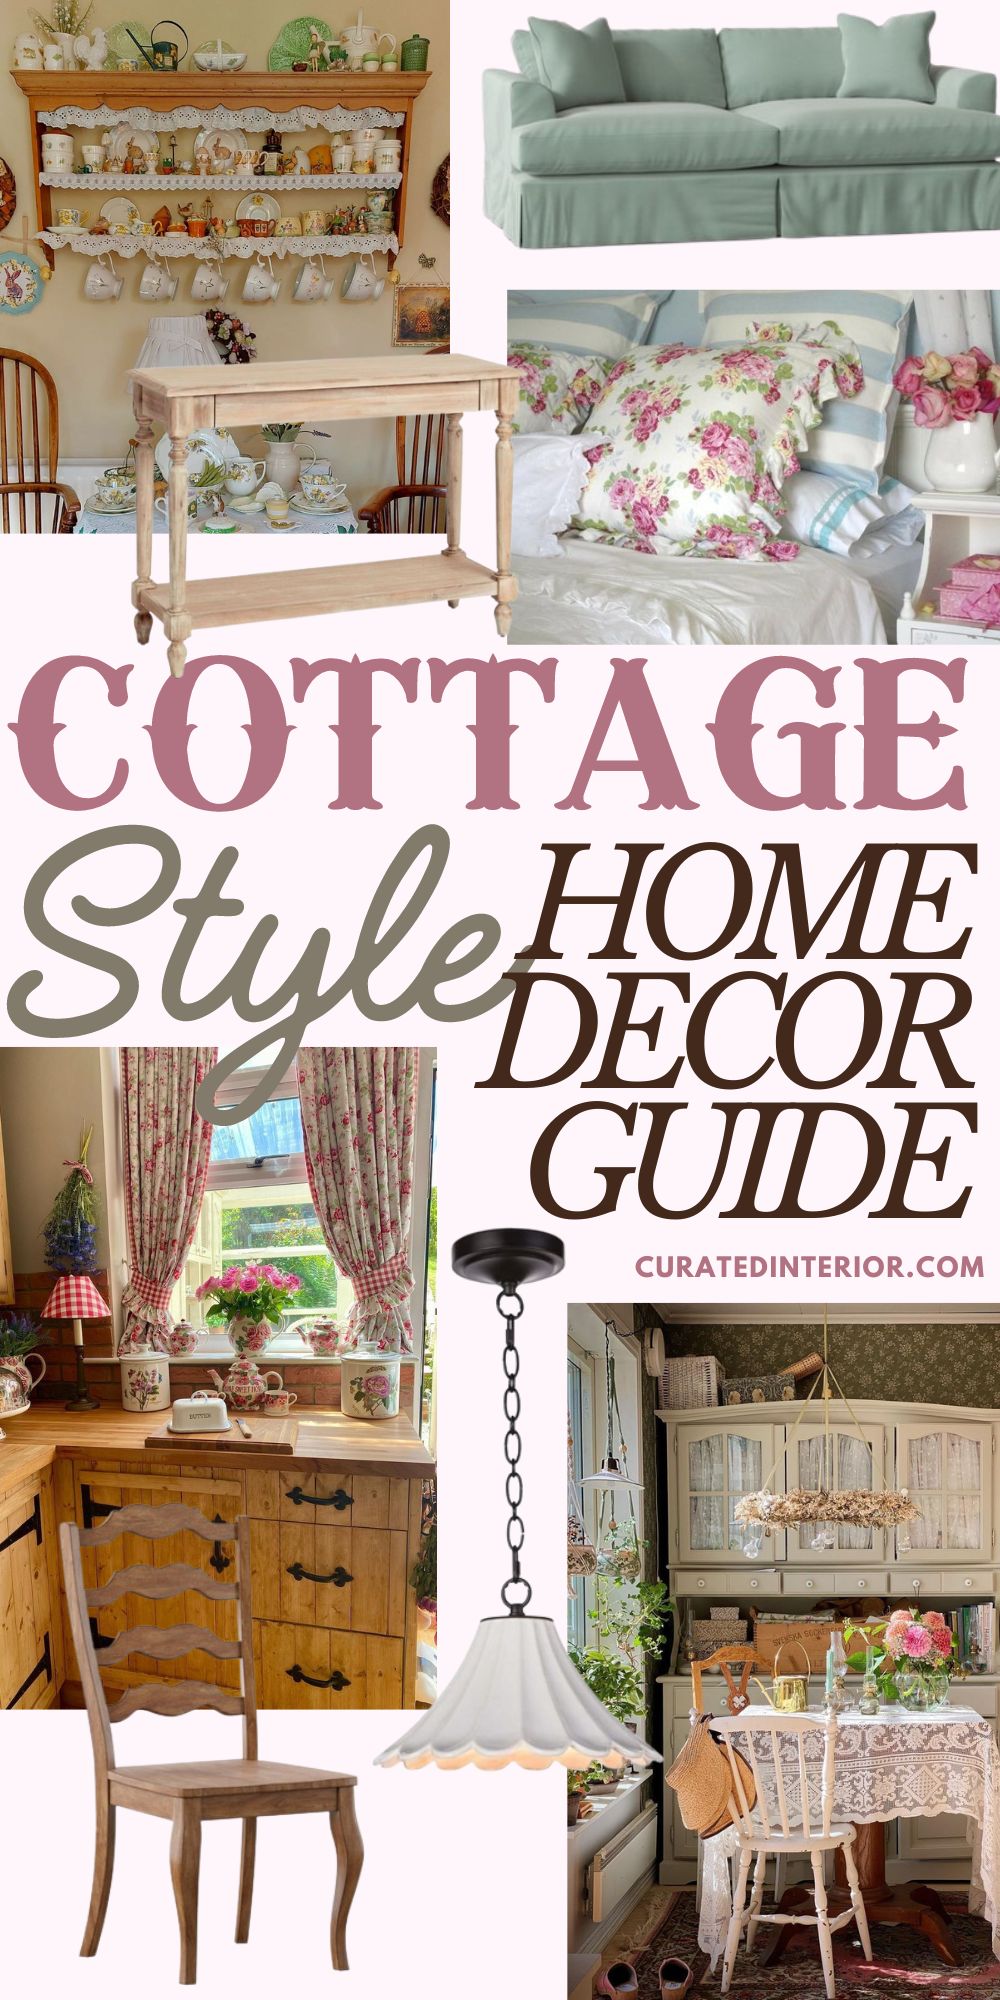 Cottage Style Home Decor Guide